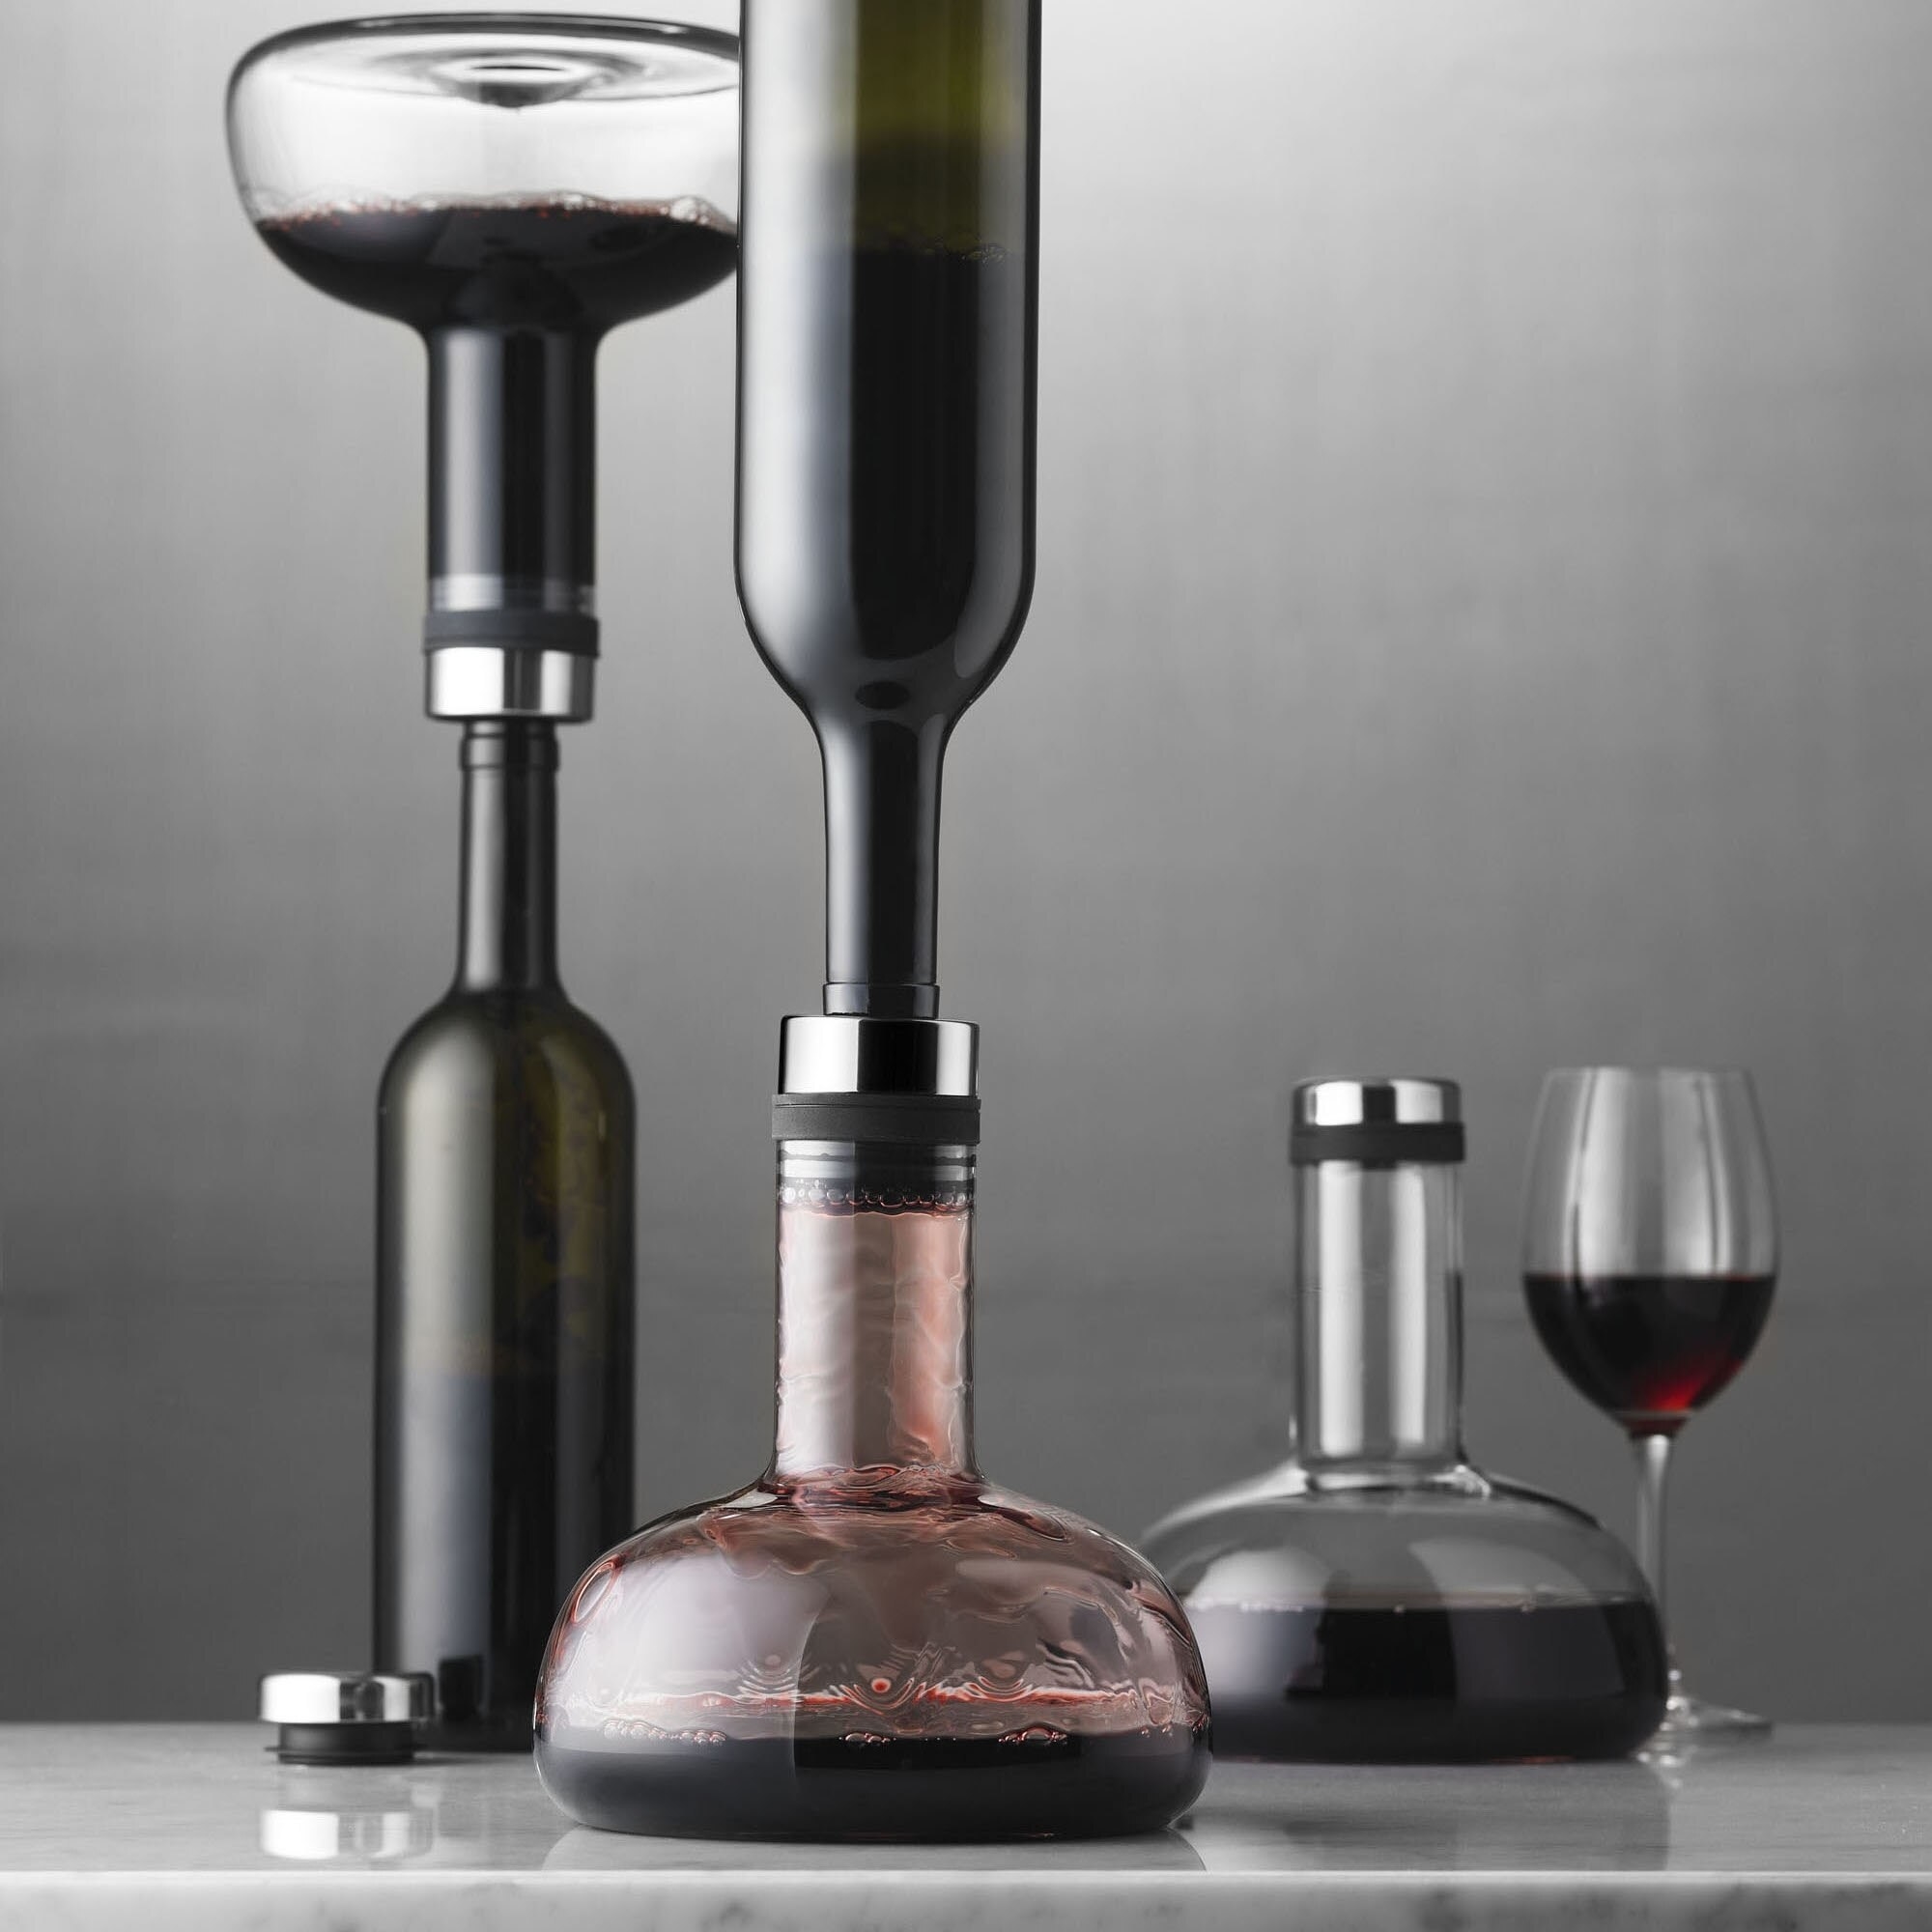 a trio of aerating carafes aerating several bottles of red wine